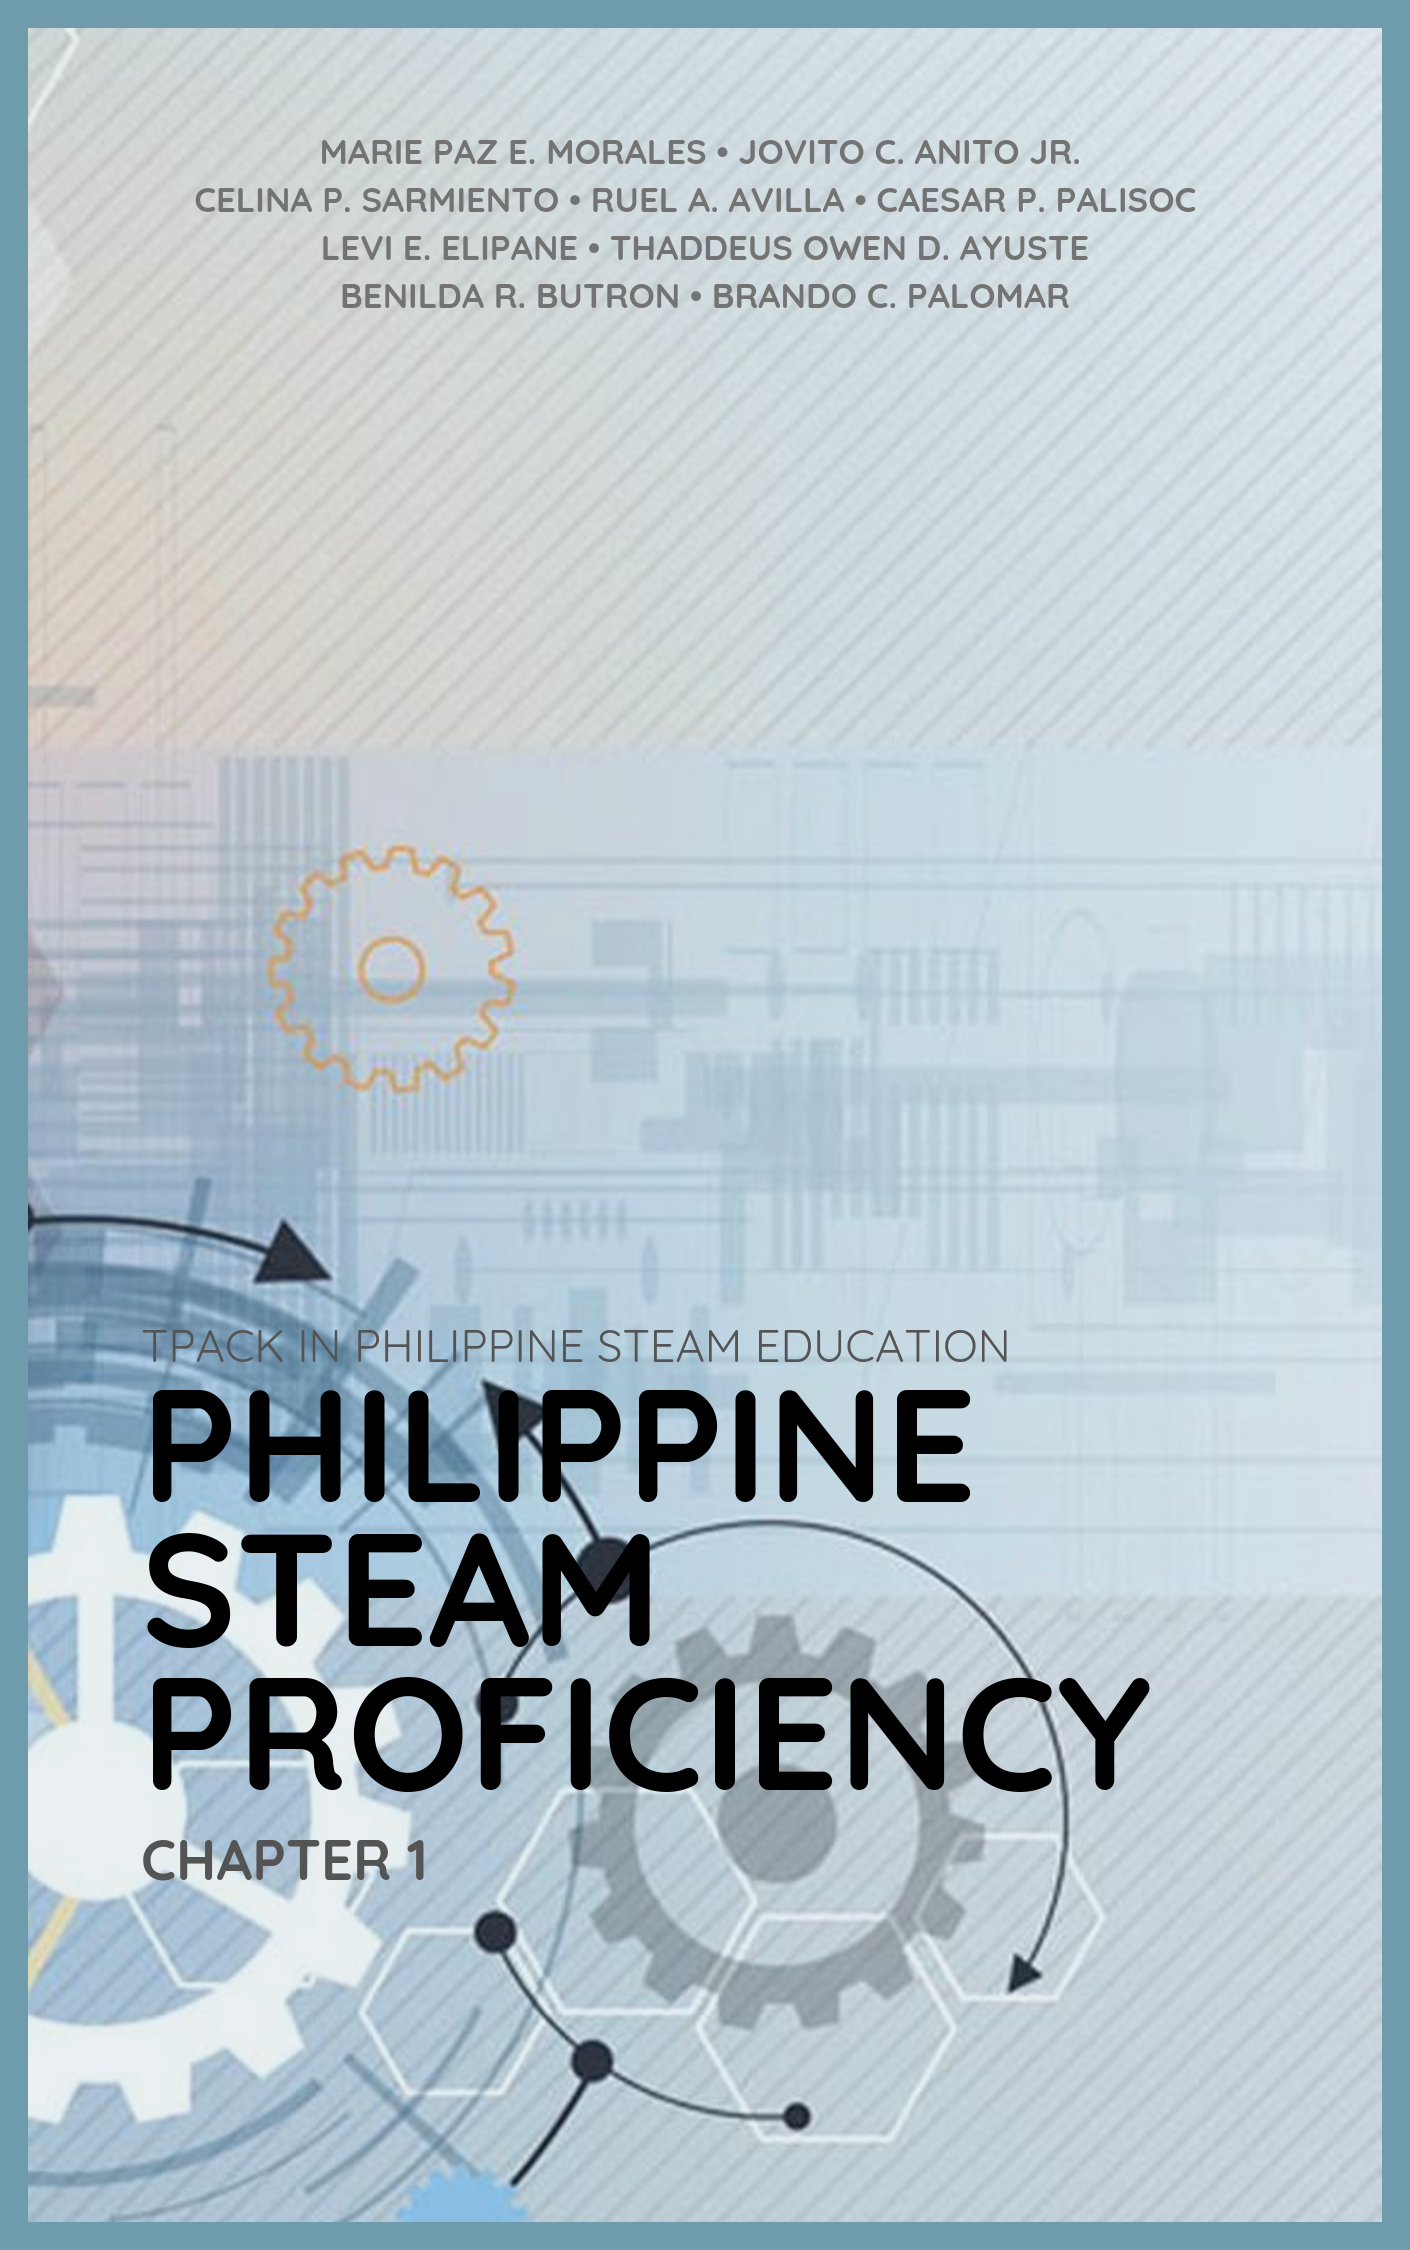 Cover for Chapter 1: Philippine STEAM Proficiency